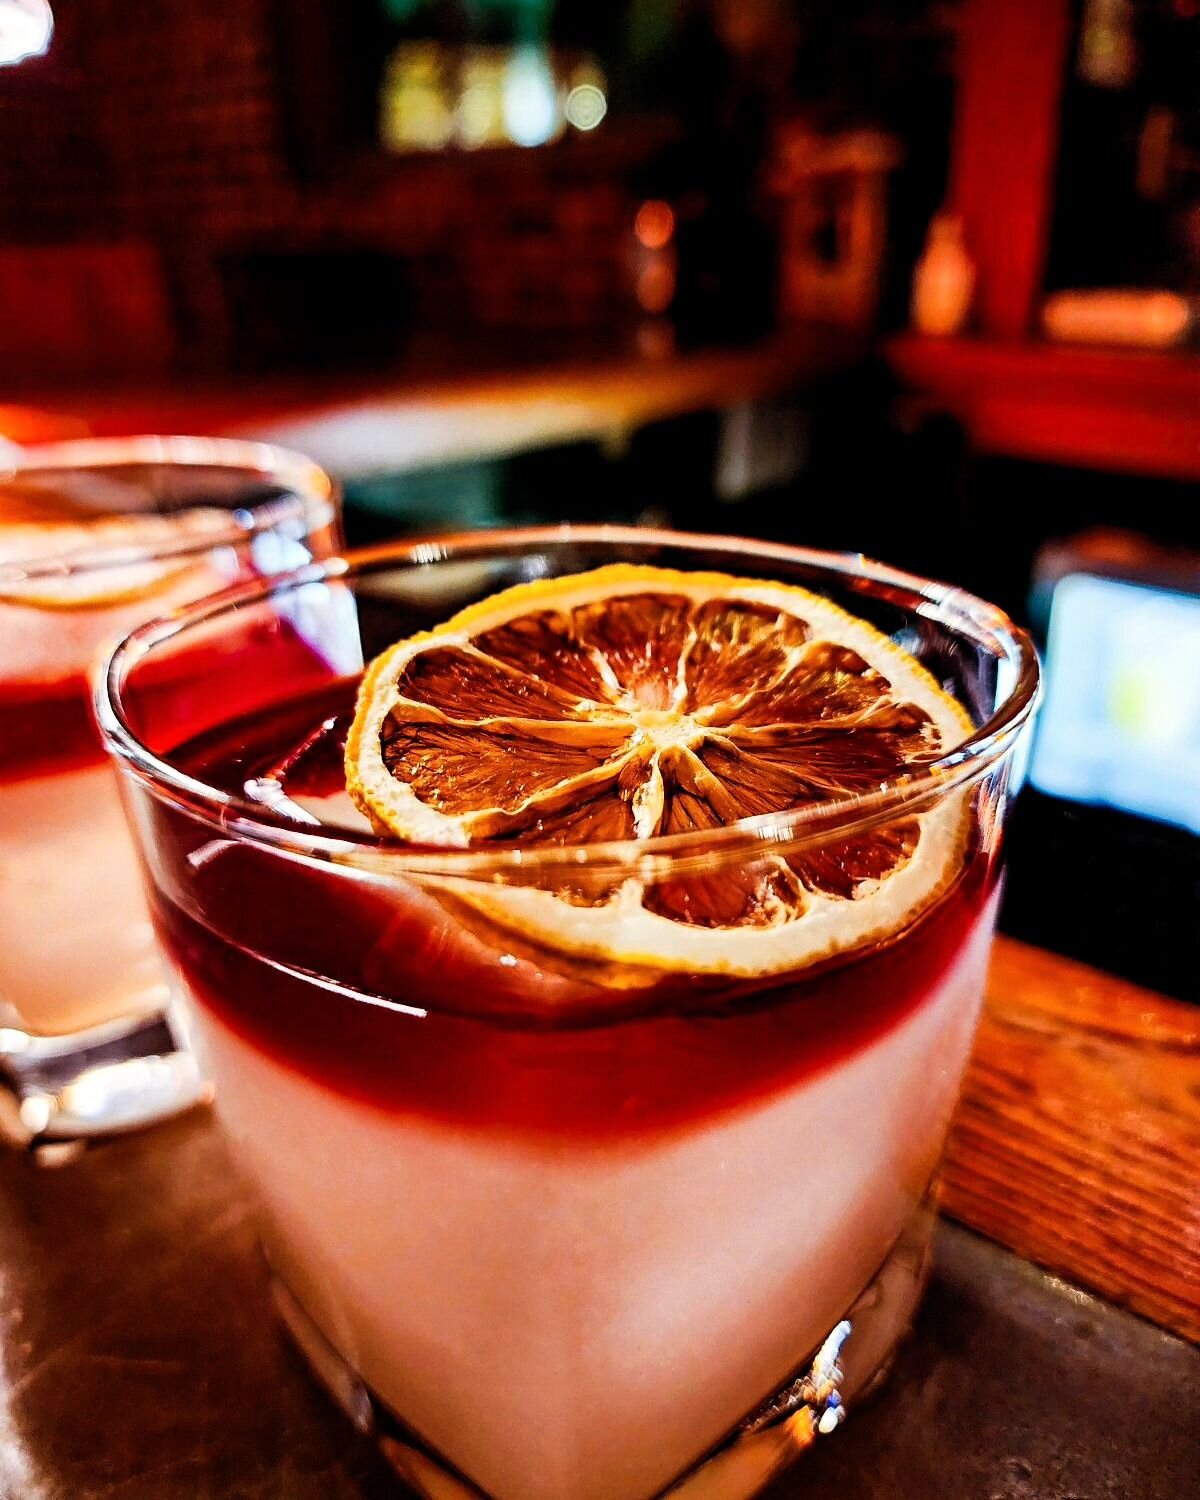 Is that a science experiment, or can I have a sip...?

Straight from the mastermind of our resident mixologist comes this new eye-catching cocktail: Jupiter In Taurus.

This drinkable art piece blends gin with red wine to bring you a lesson in liquid